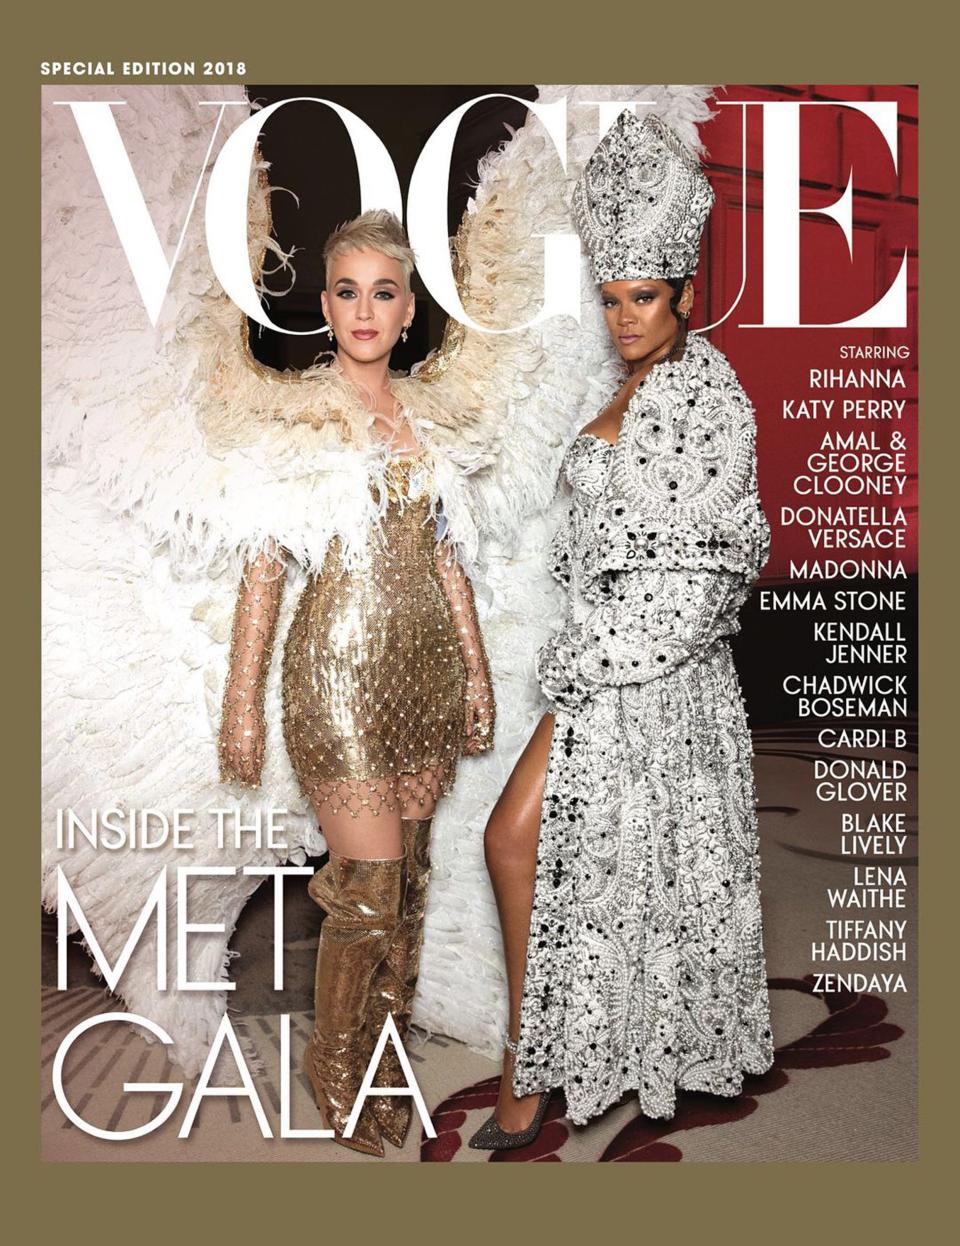 Katy Perry and Rihanna as the cover stars of the 2018 Met gala special edition of Vogue.